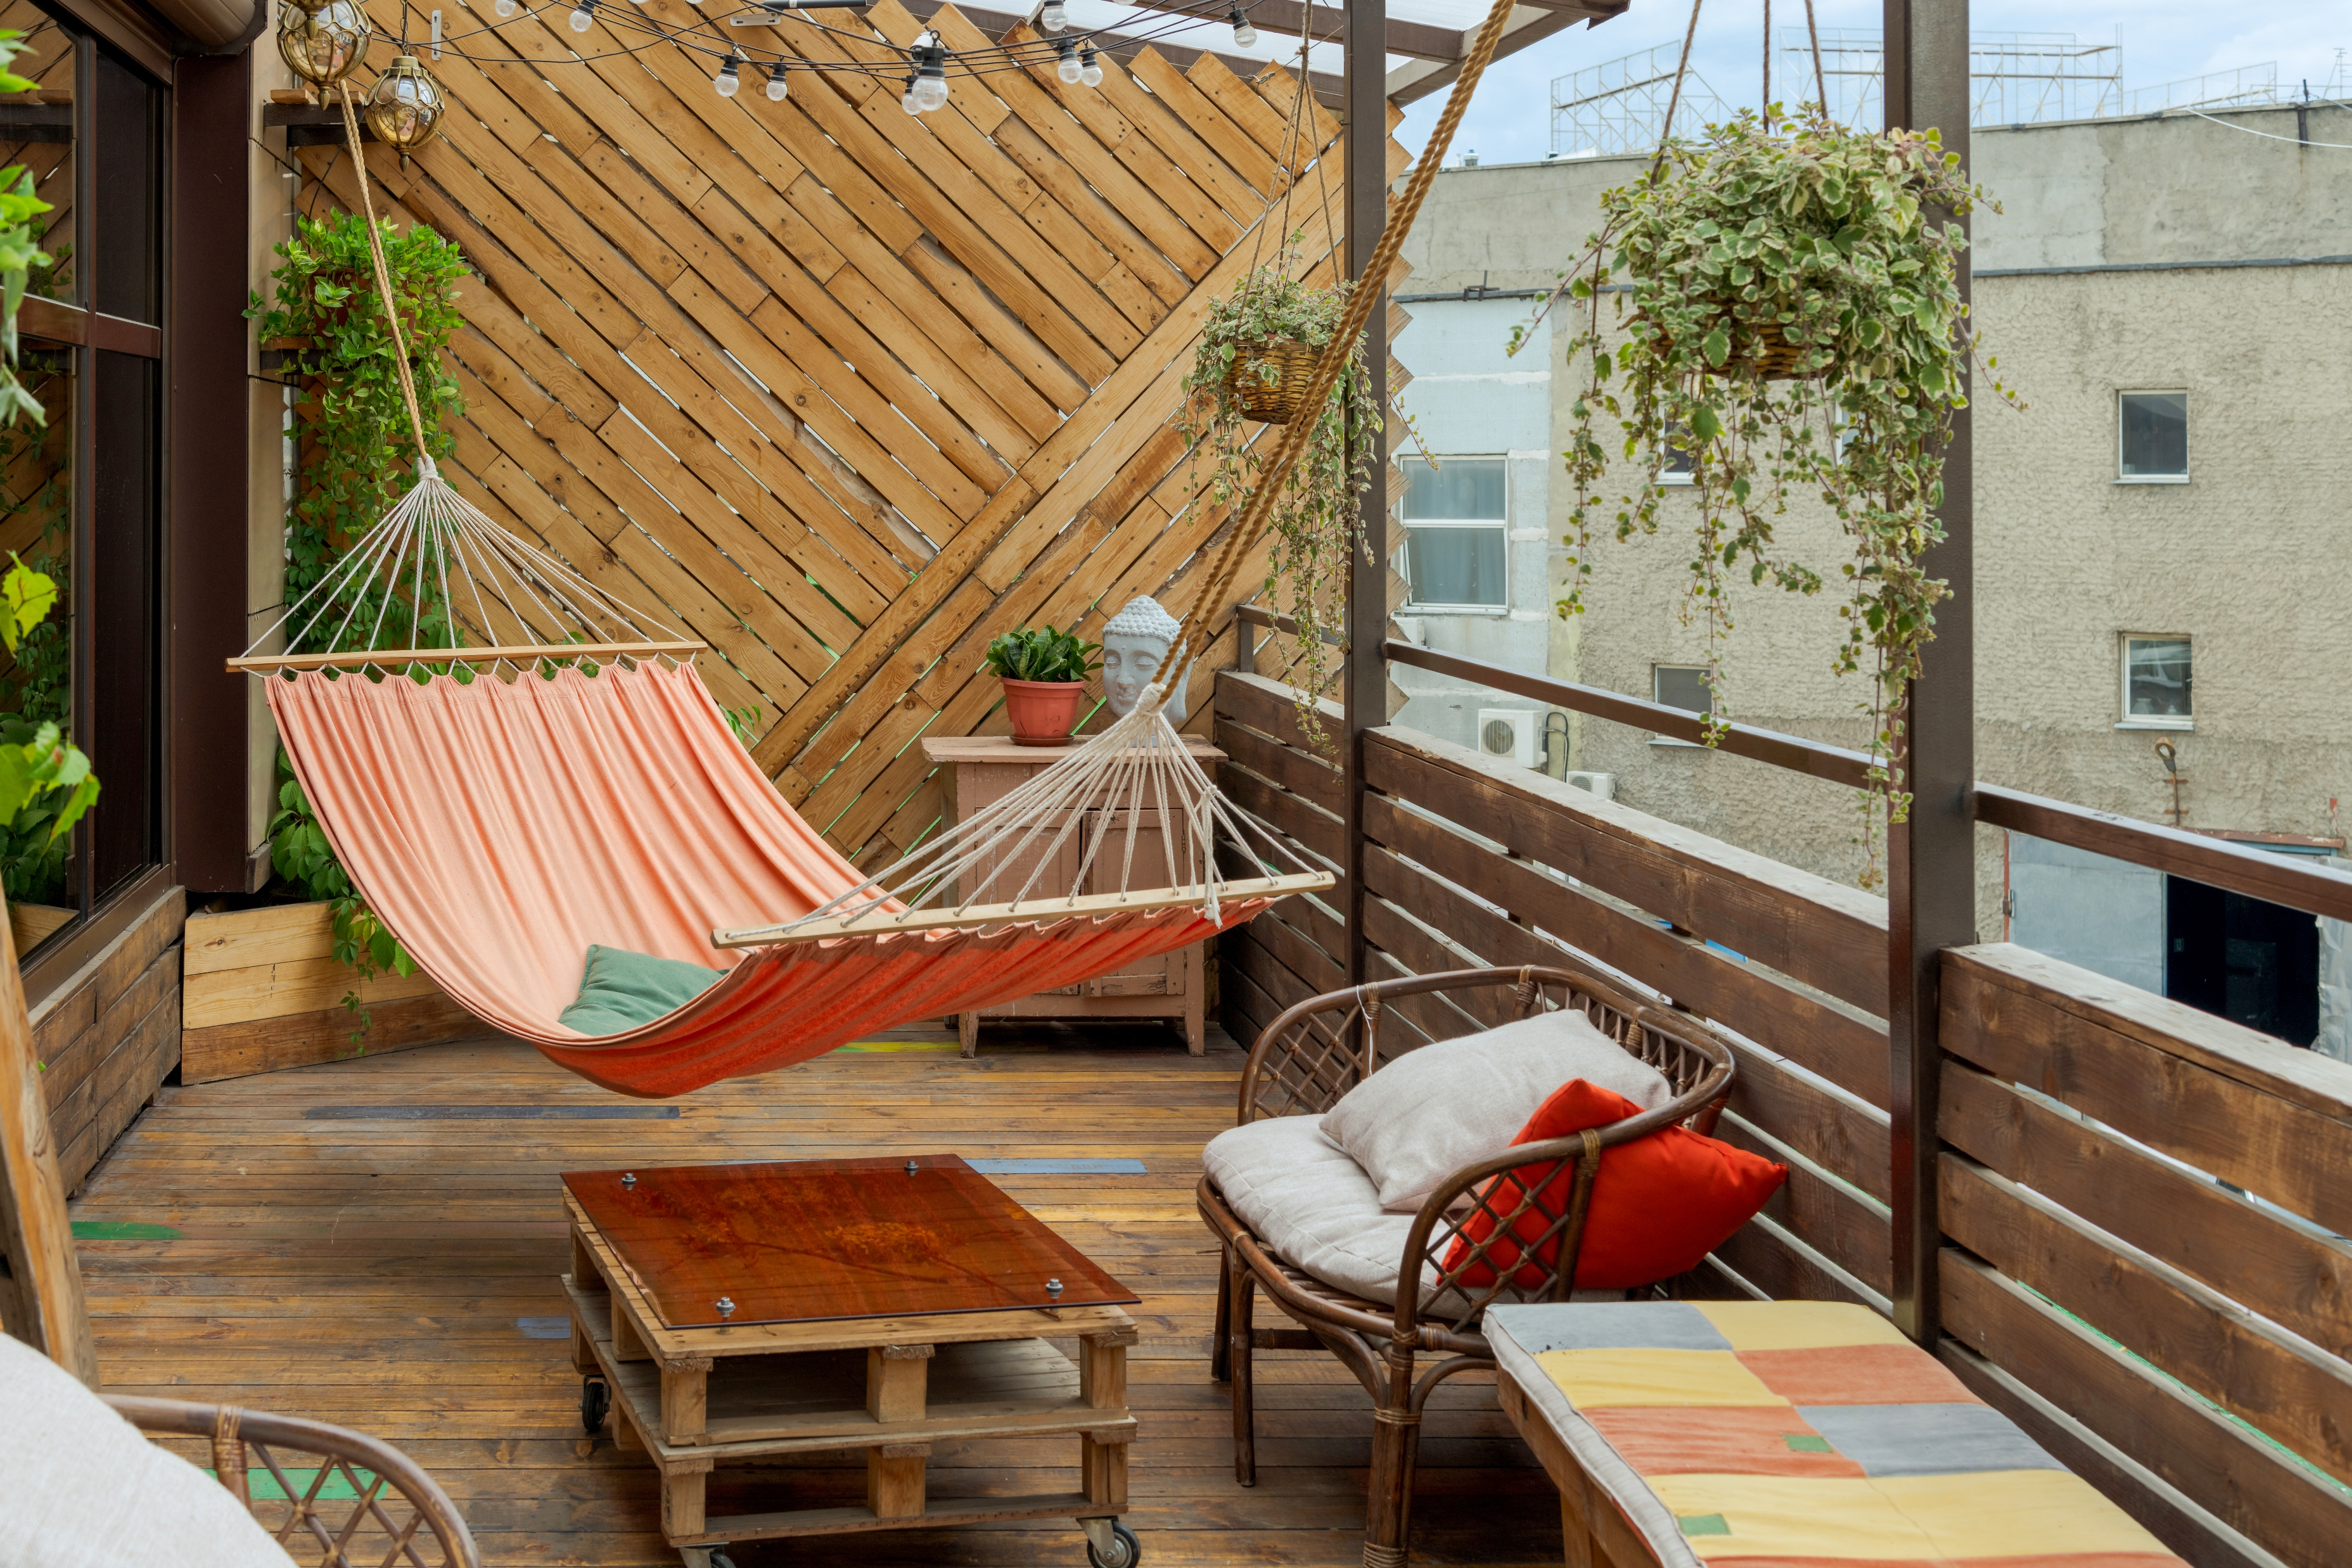 Wooden balcony with red hammock